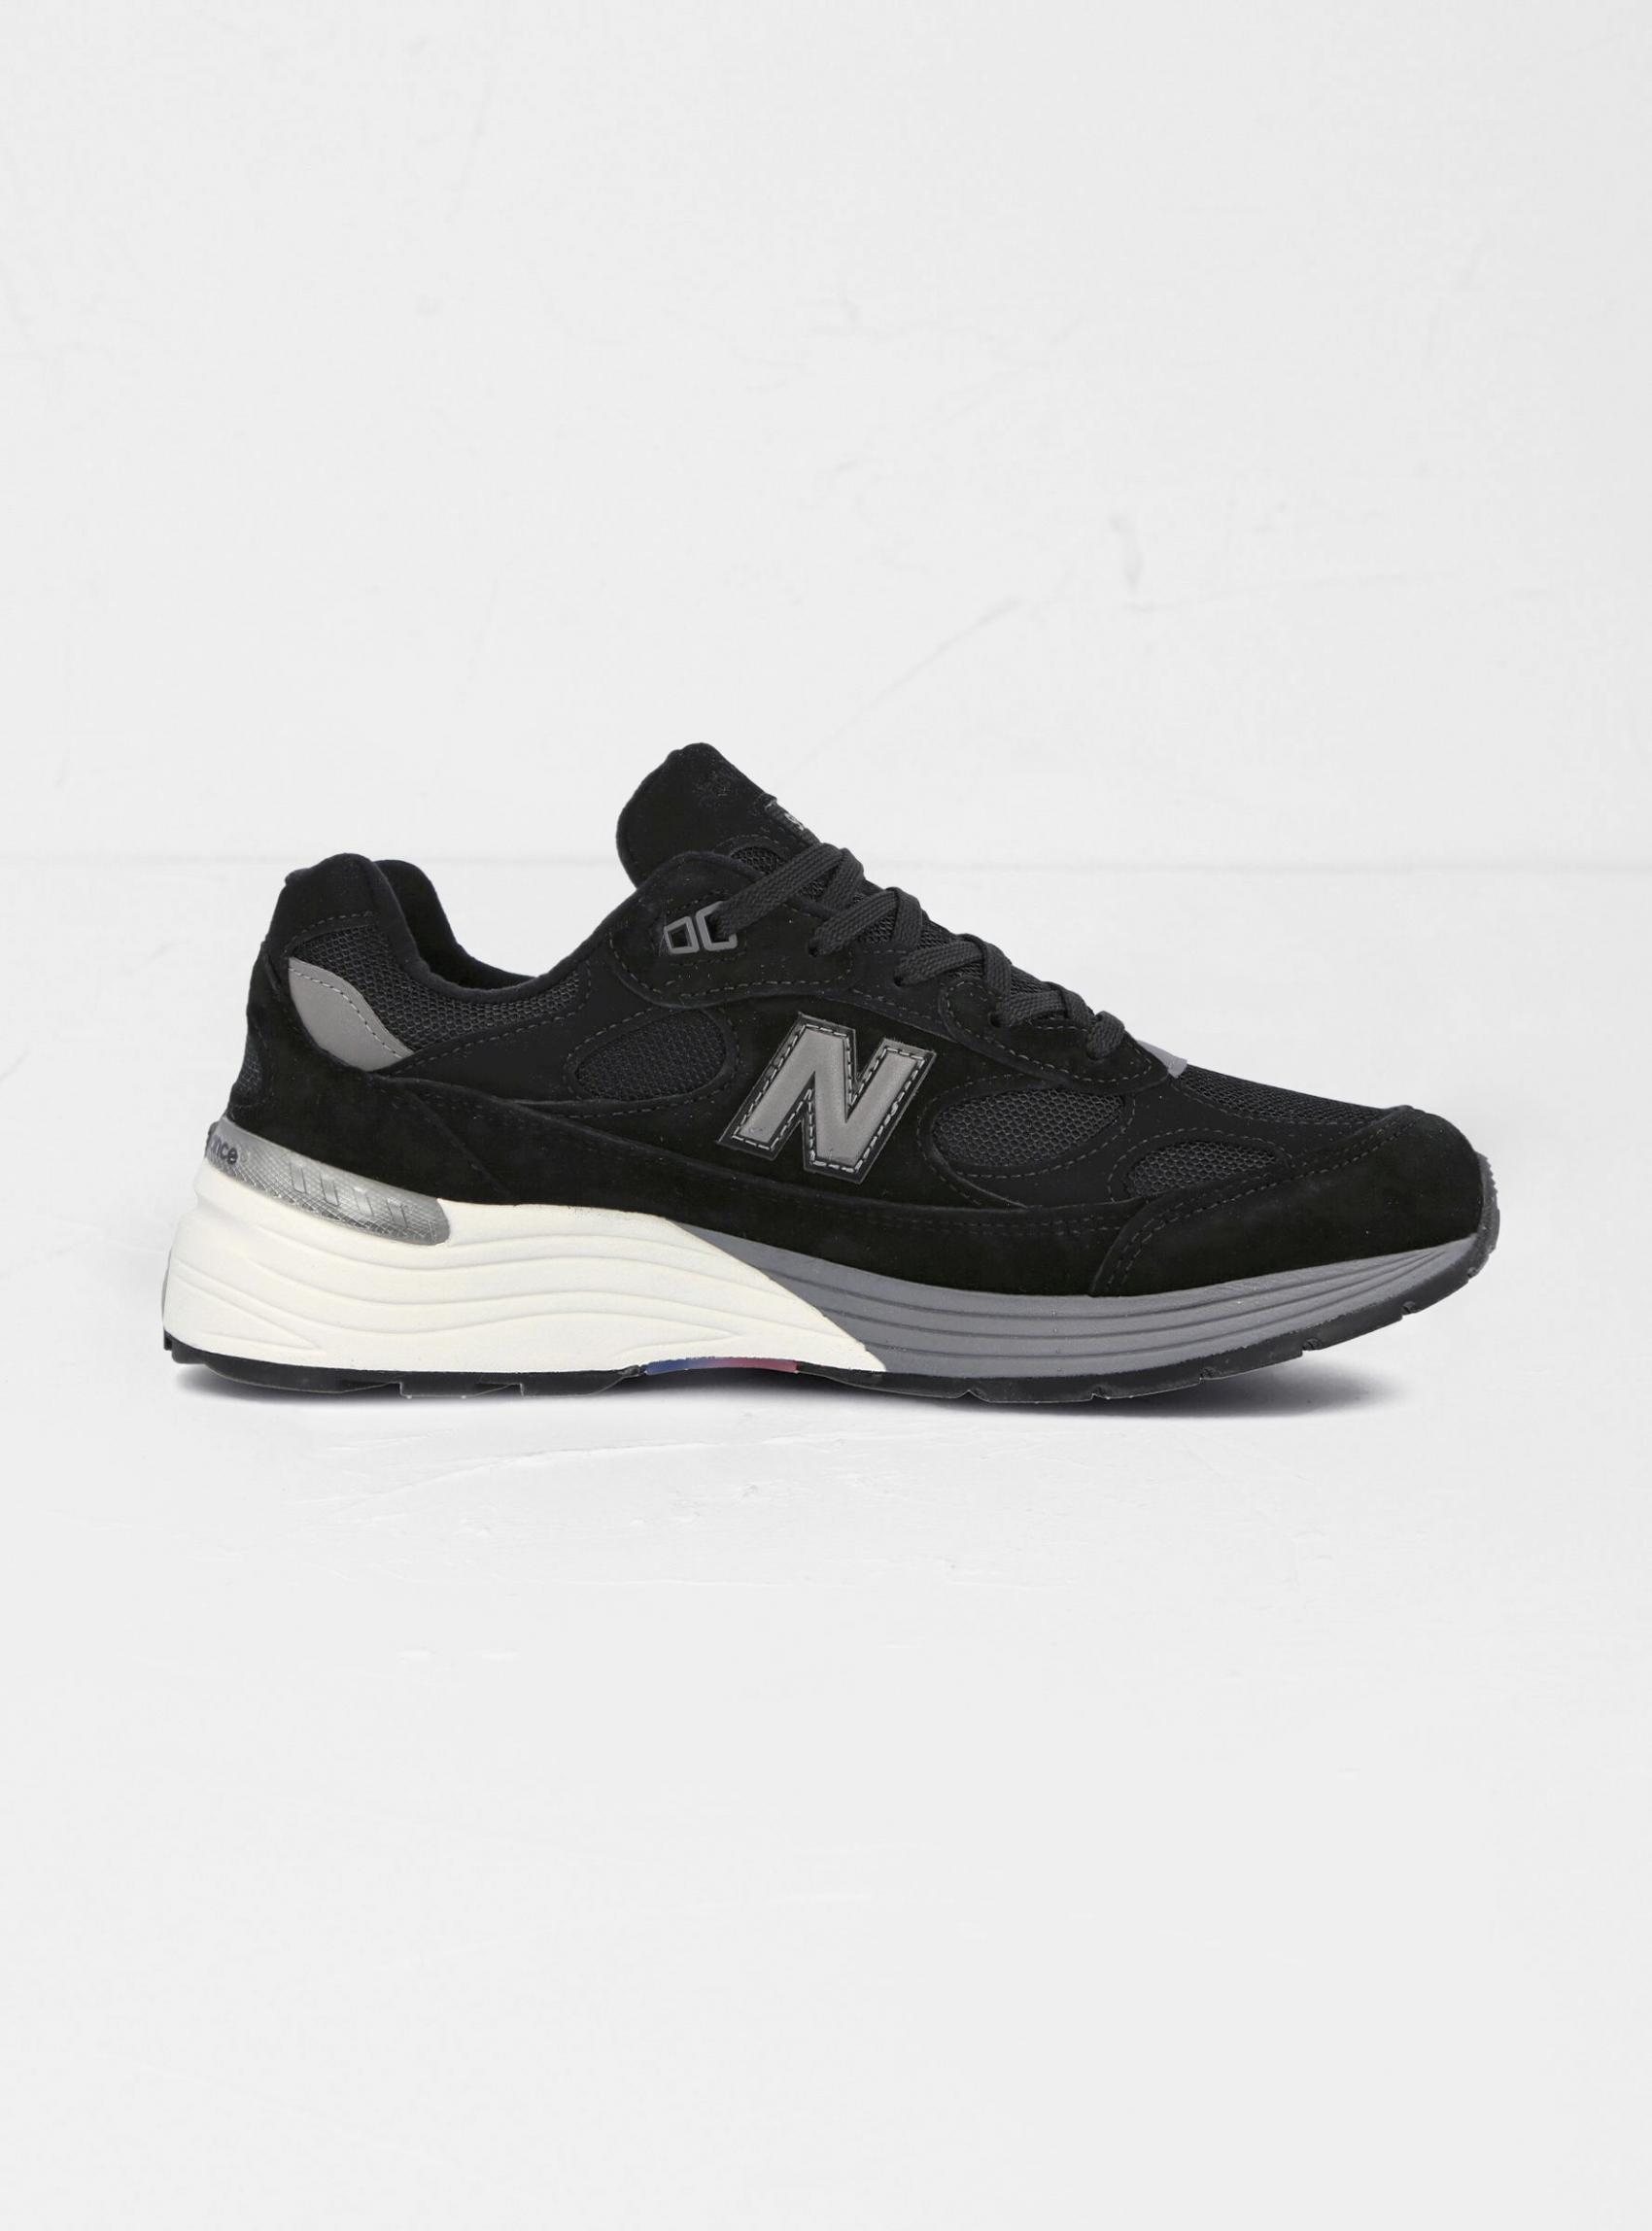 Footwear | New Balance Mens Made In Us 992Bl Trainers Black Black